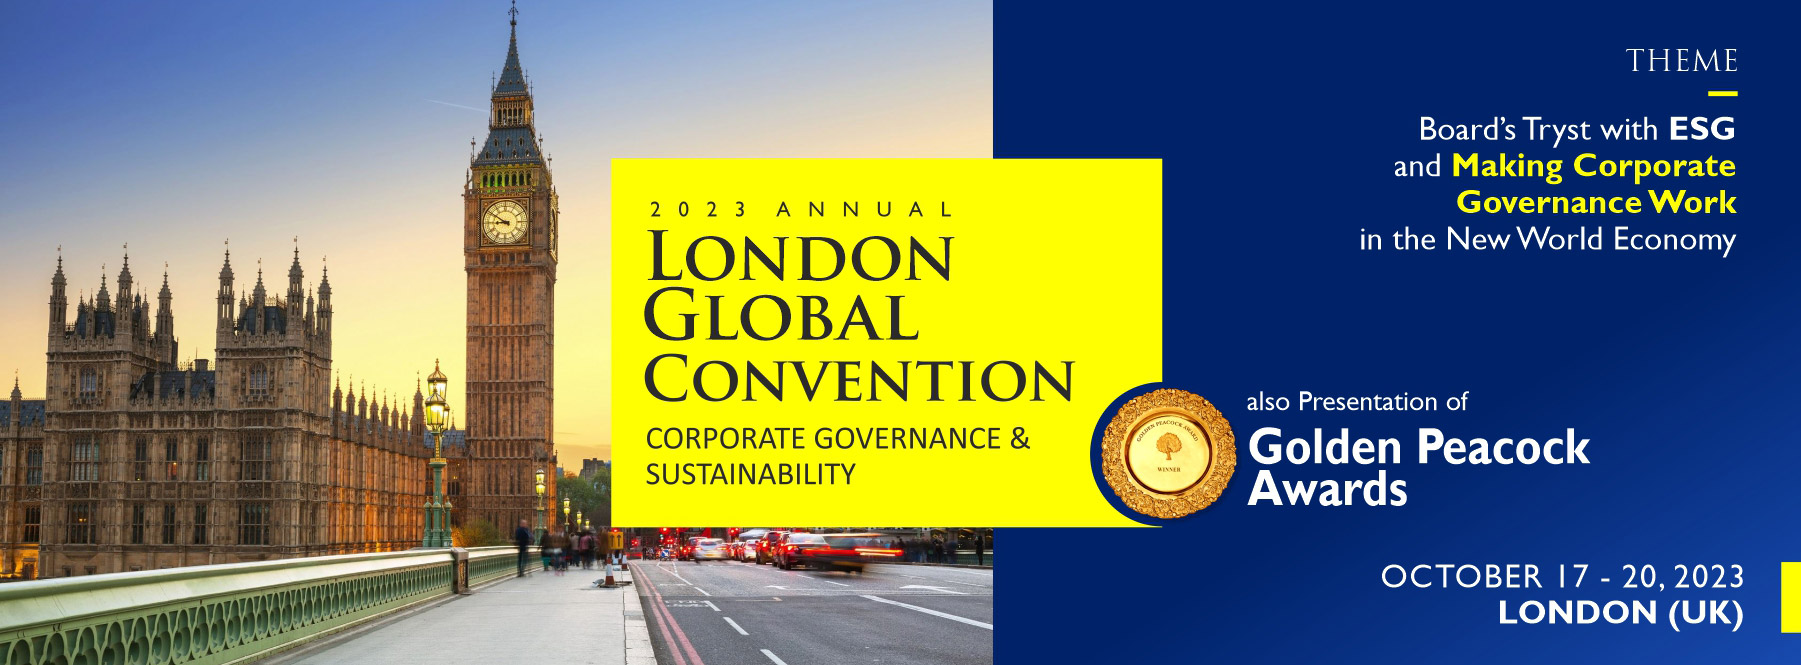 2023 London Global Convention
Corporate Governance & Sustainability Global Business Meet